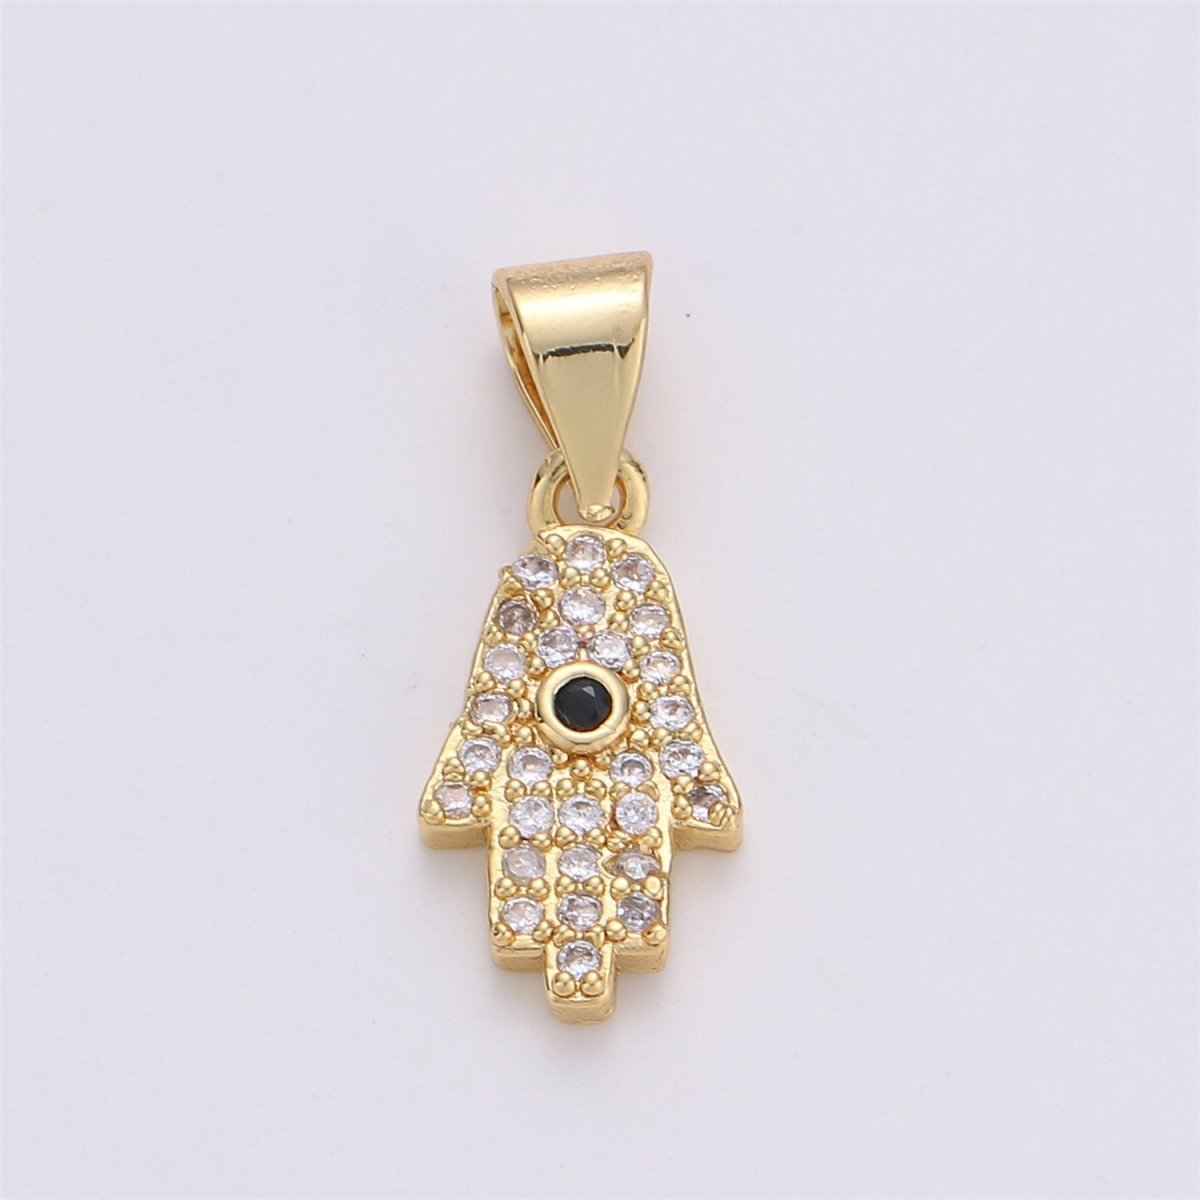 24K Gold Filled Dainty Evil Eye Pendant Hamsa Hand with Micro Pave Cubic Zirconia CZ Stone for Spiritual Talisman Necklace or Bracelet I-587 - DLUXCA